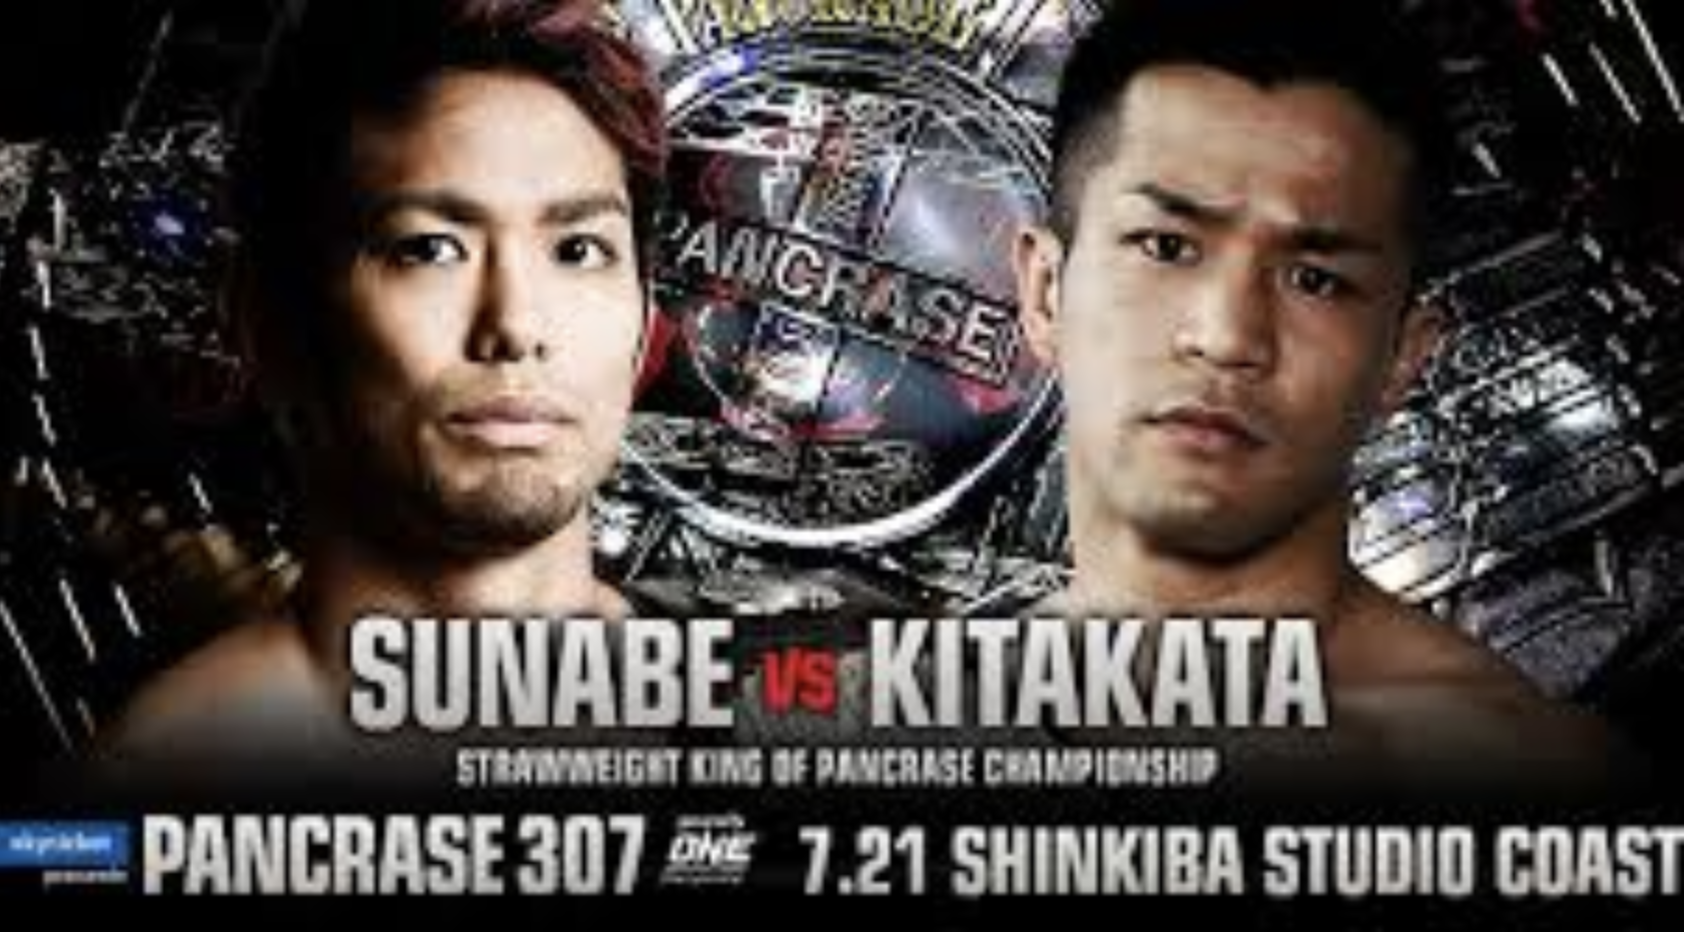 Official Pancrase 307 Results